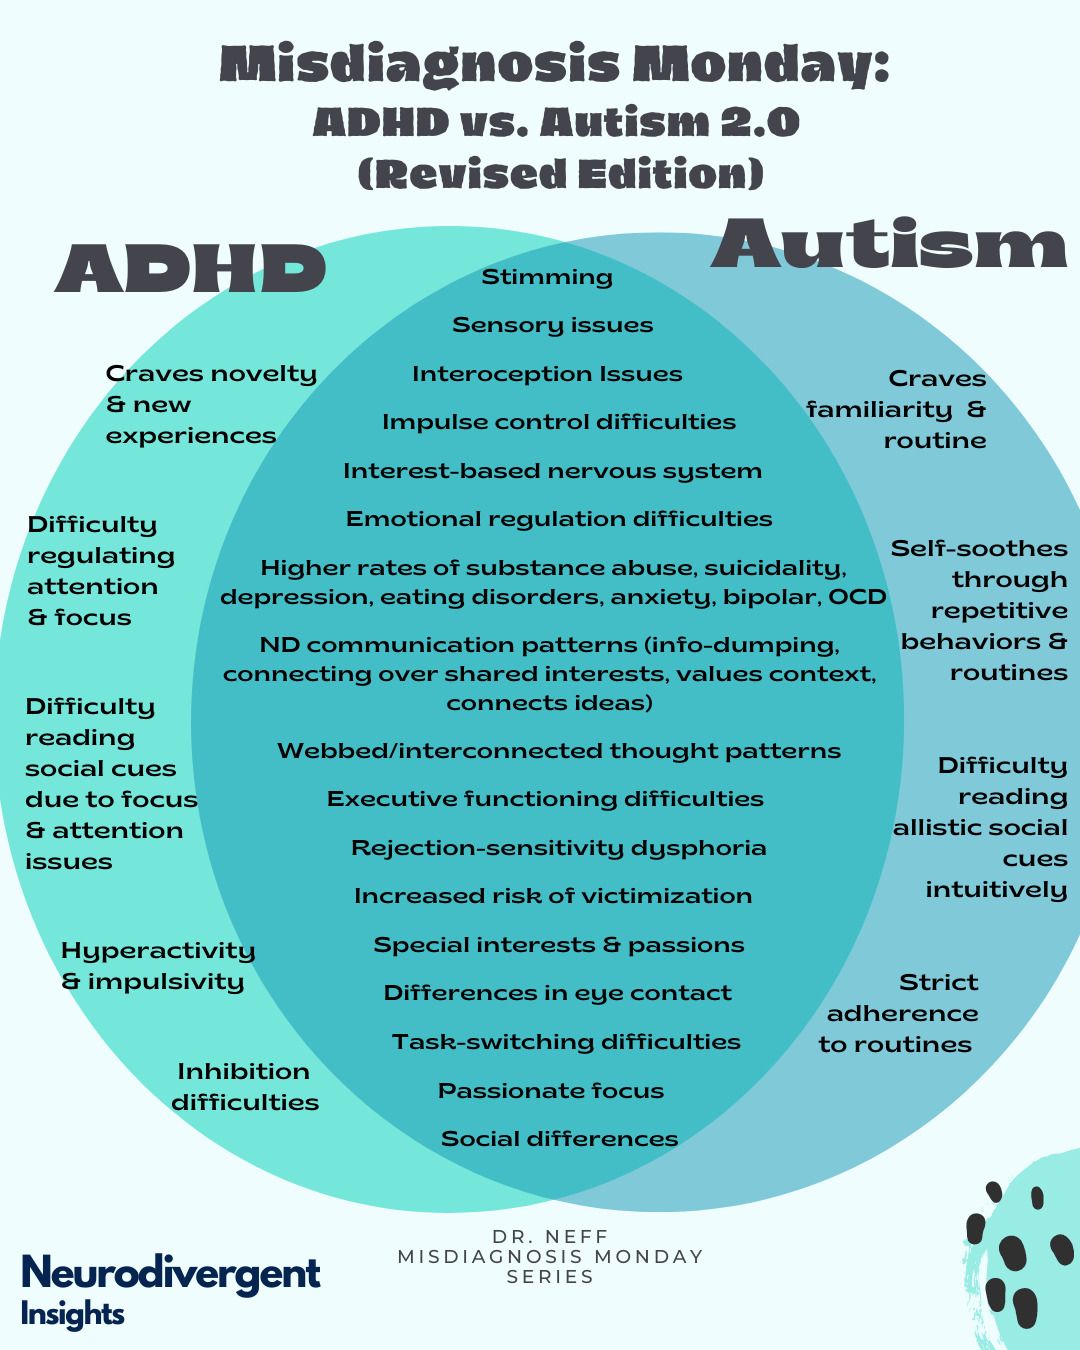 How often is autism misdiagnosed as ADHD?